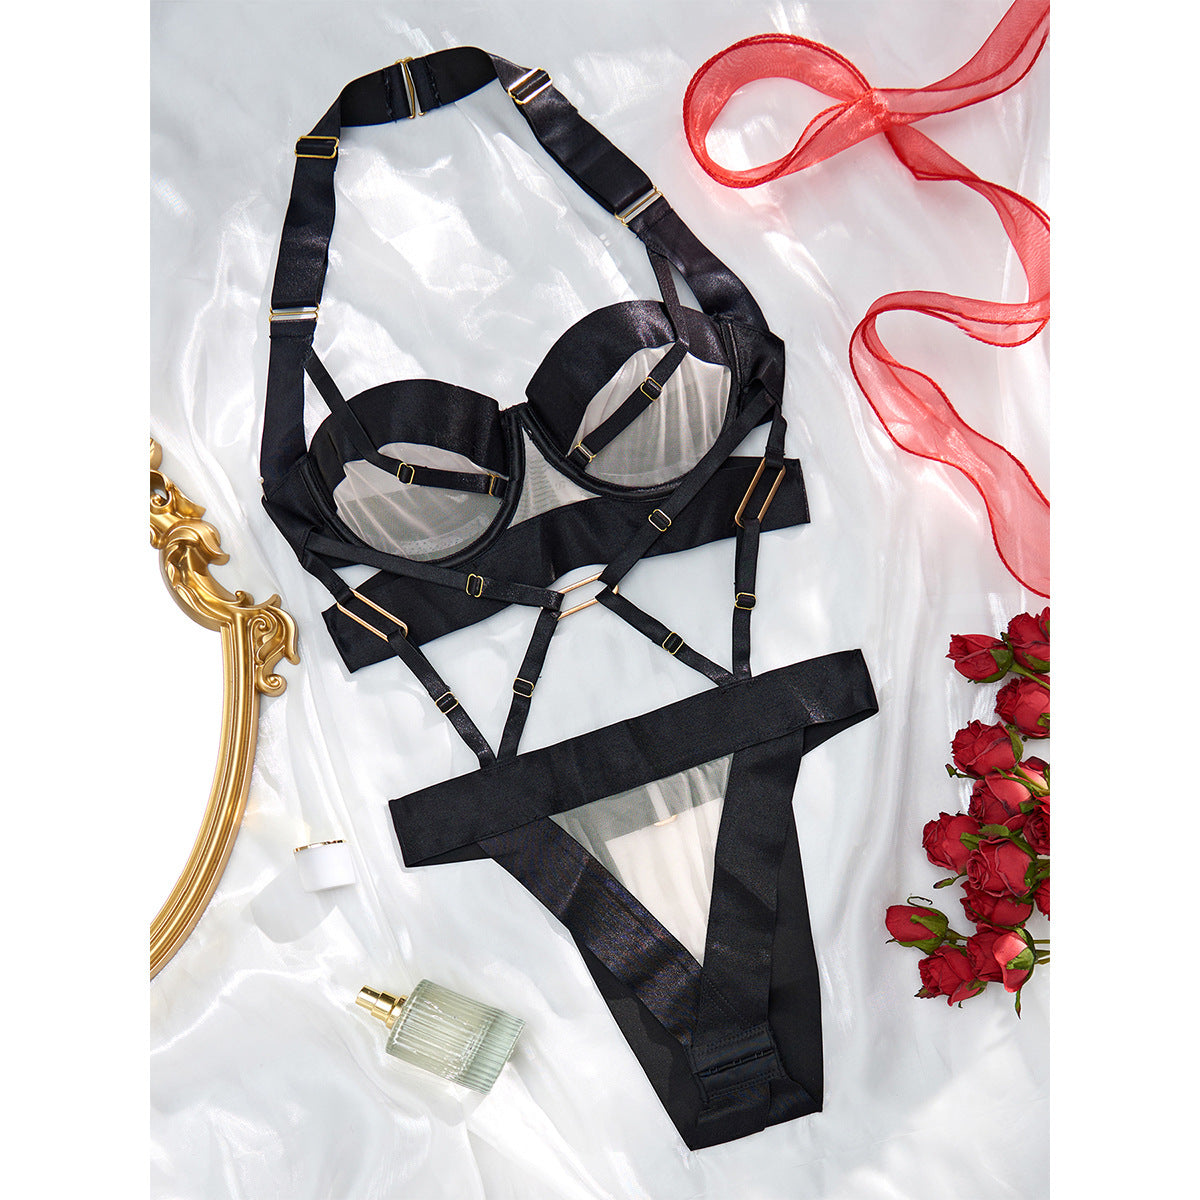 Underwear Metal Connection Buckle Bandage Mesh Joint Sexy Halter Jumpsuit for Women